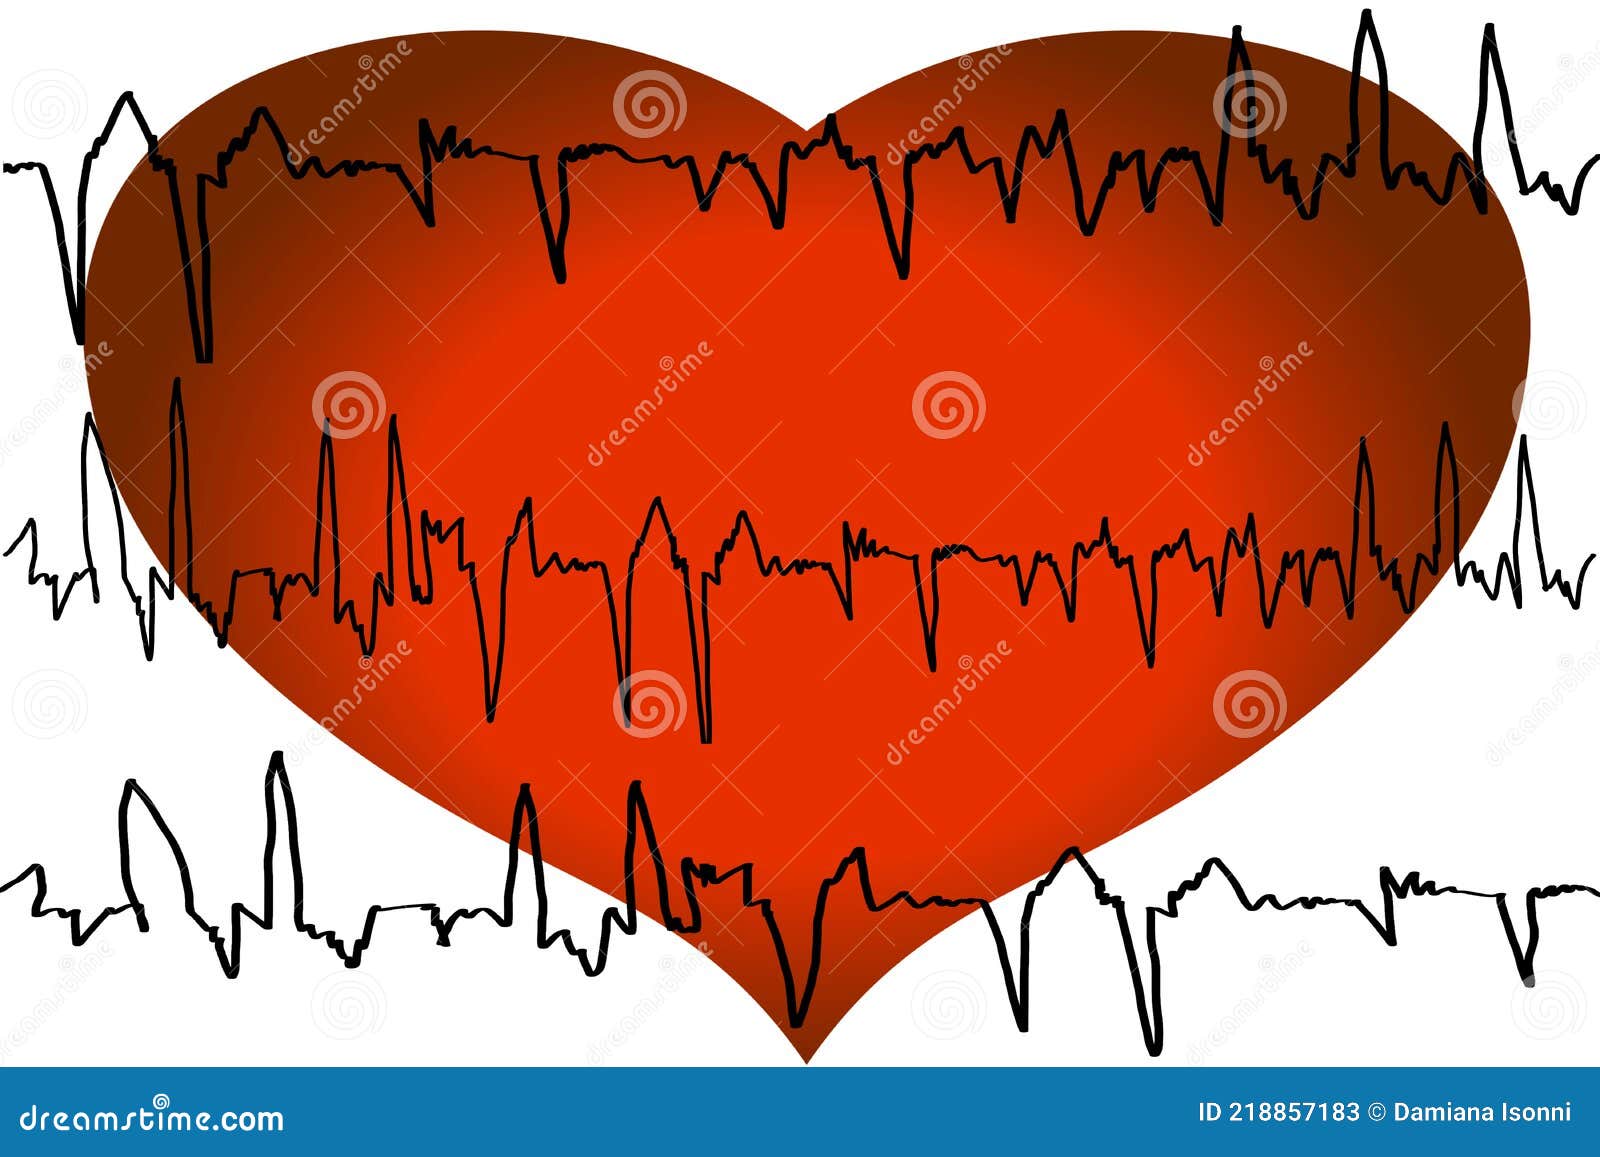 tracing of the cardiogram with heart